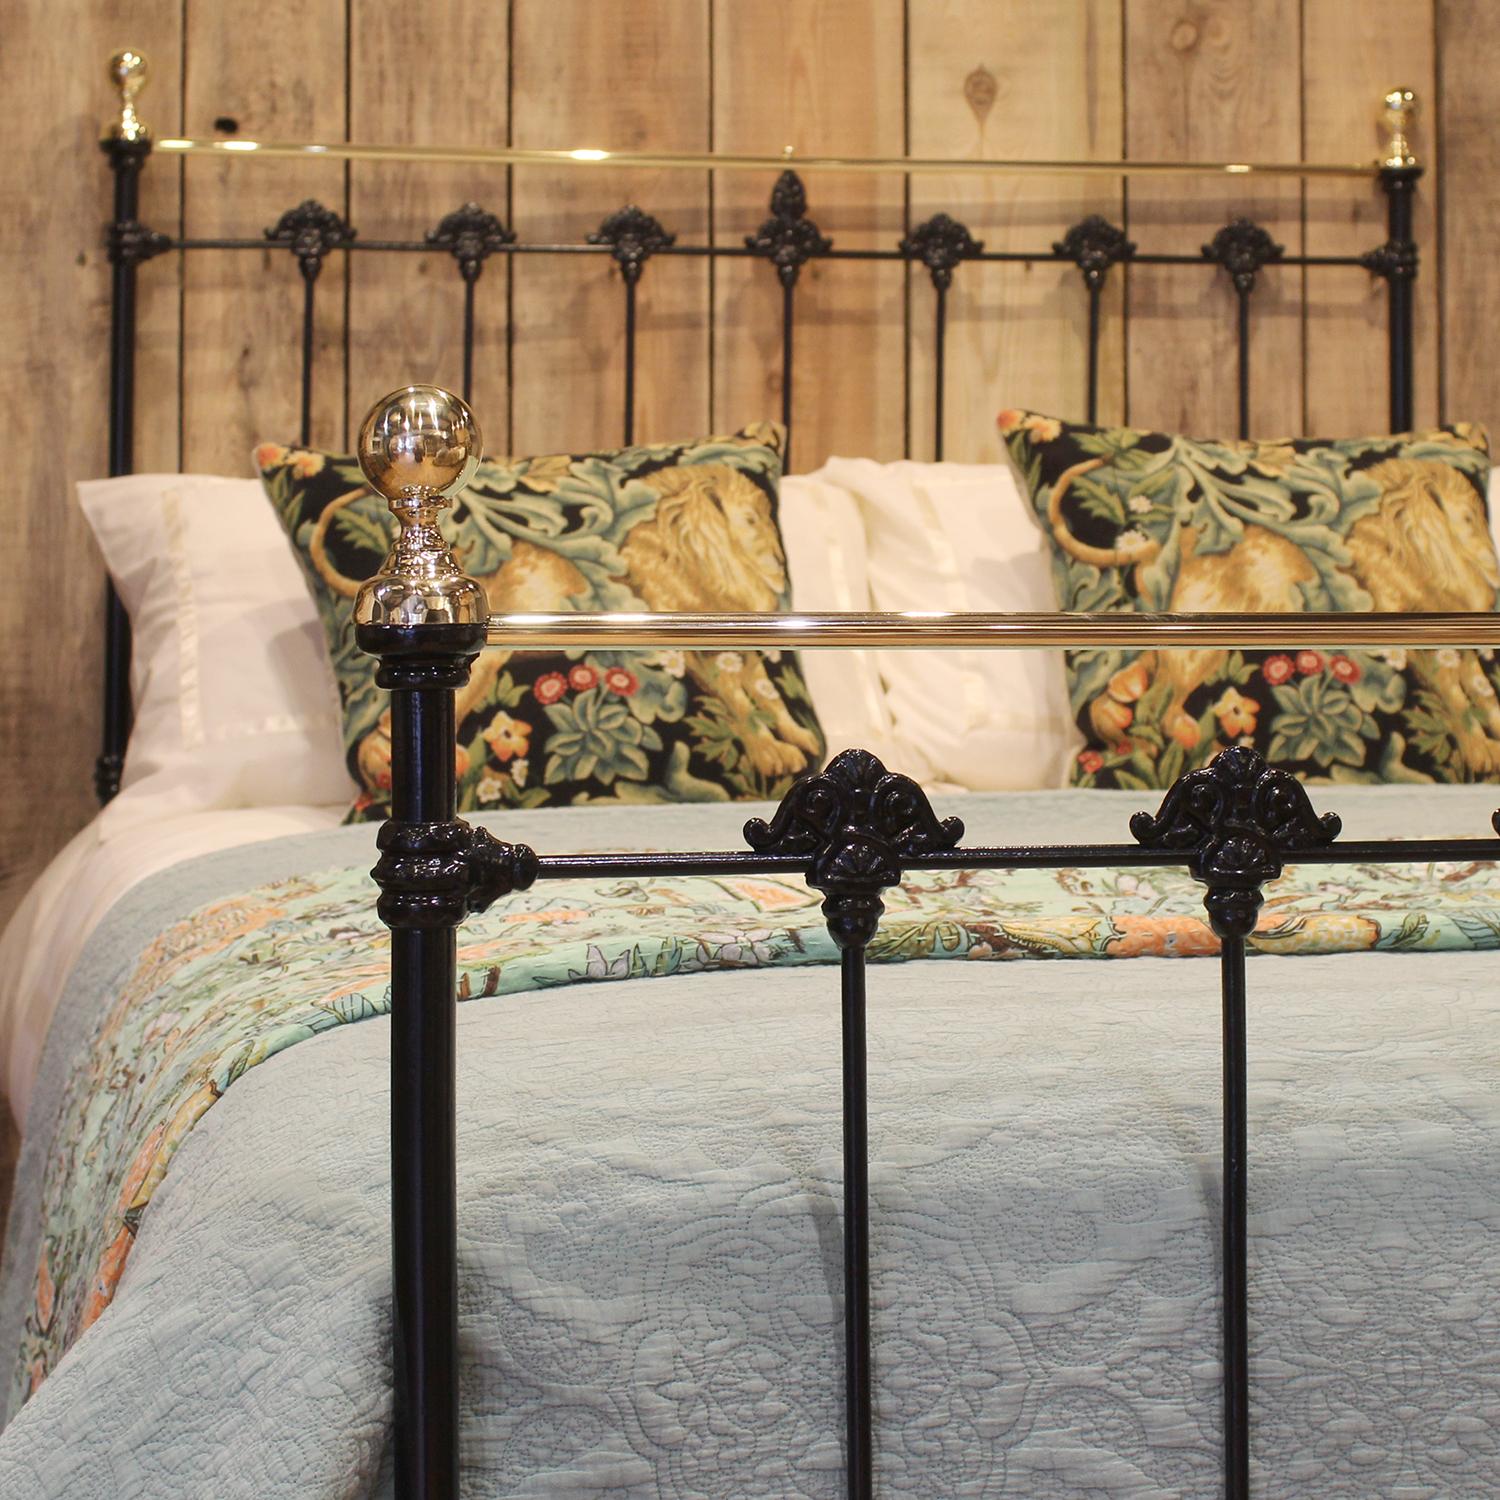 queen brass bed for sale